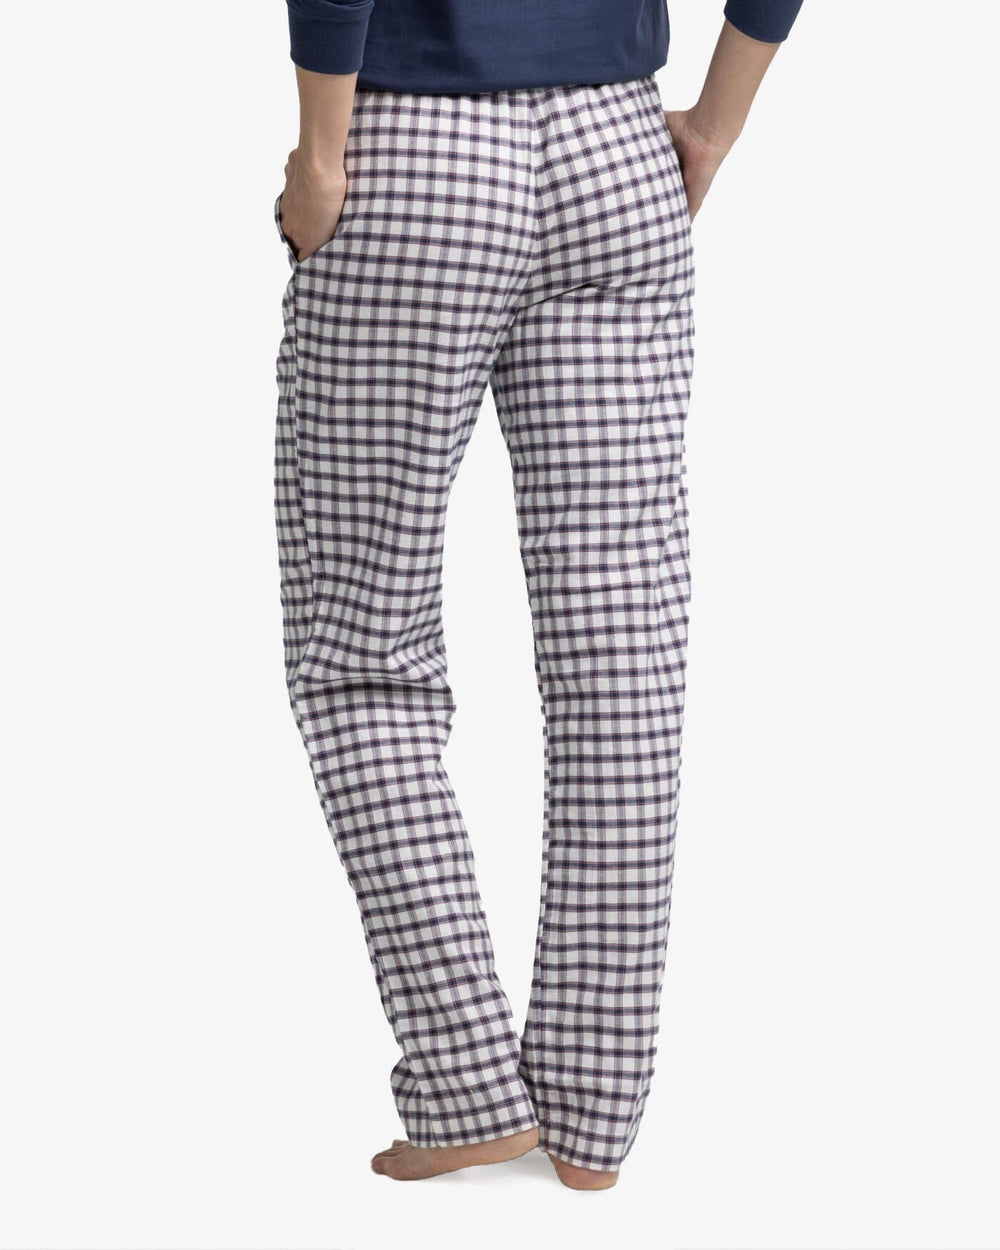 The back view of the Southern Tide Women's Silverleaf Plaid Lounge Pant by Southern Tide - Marshmallow